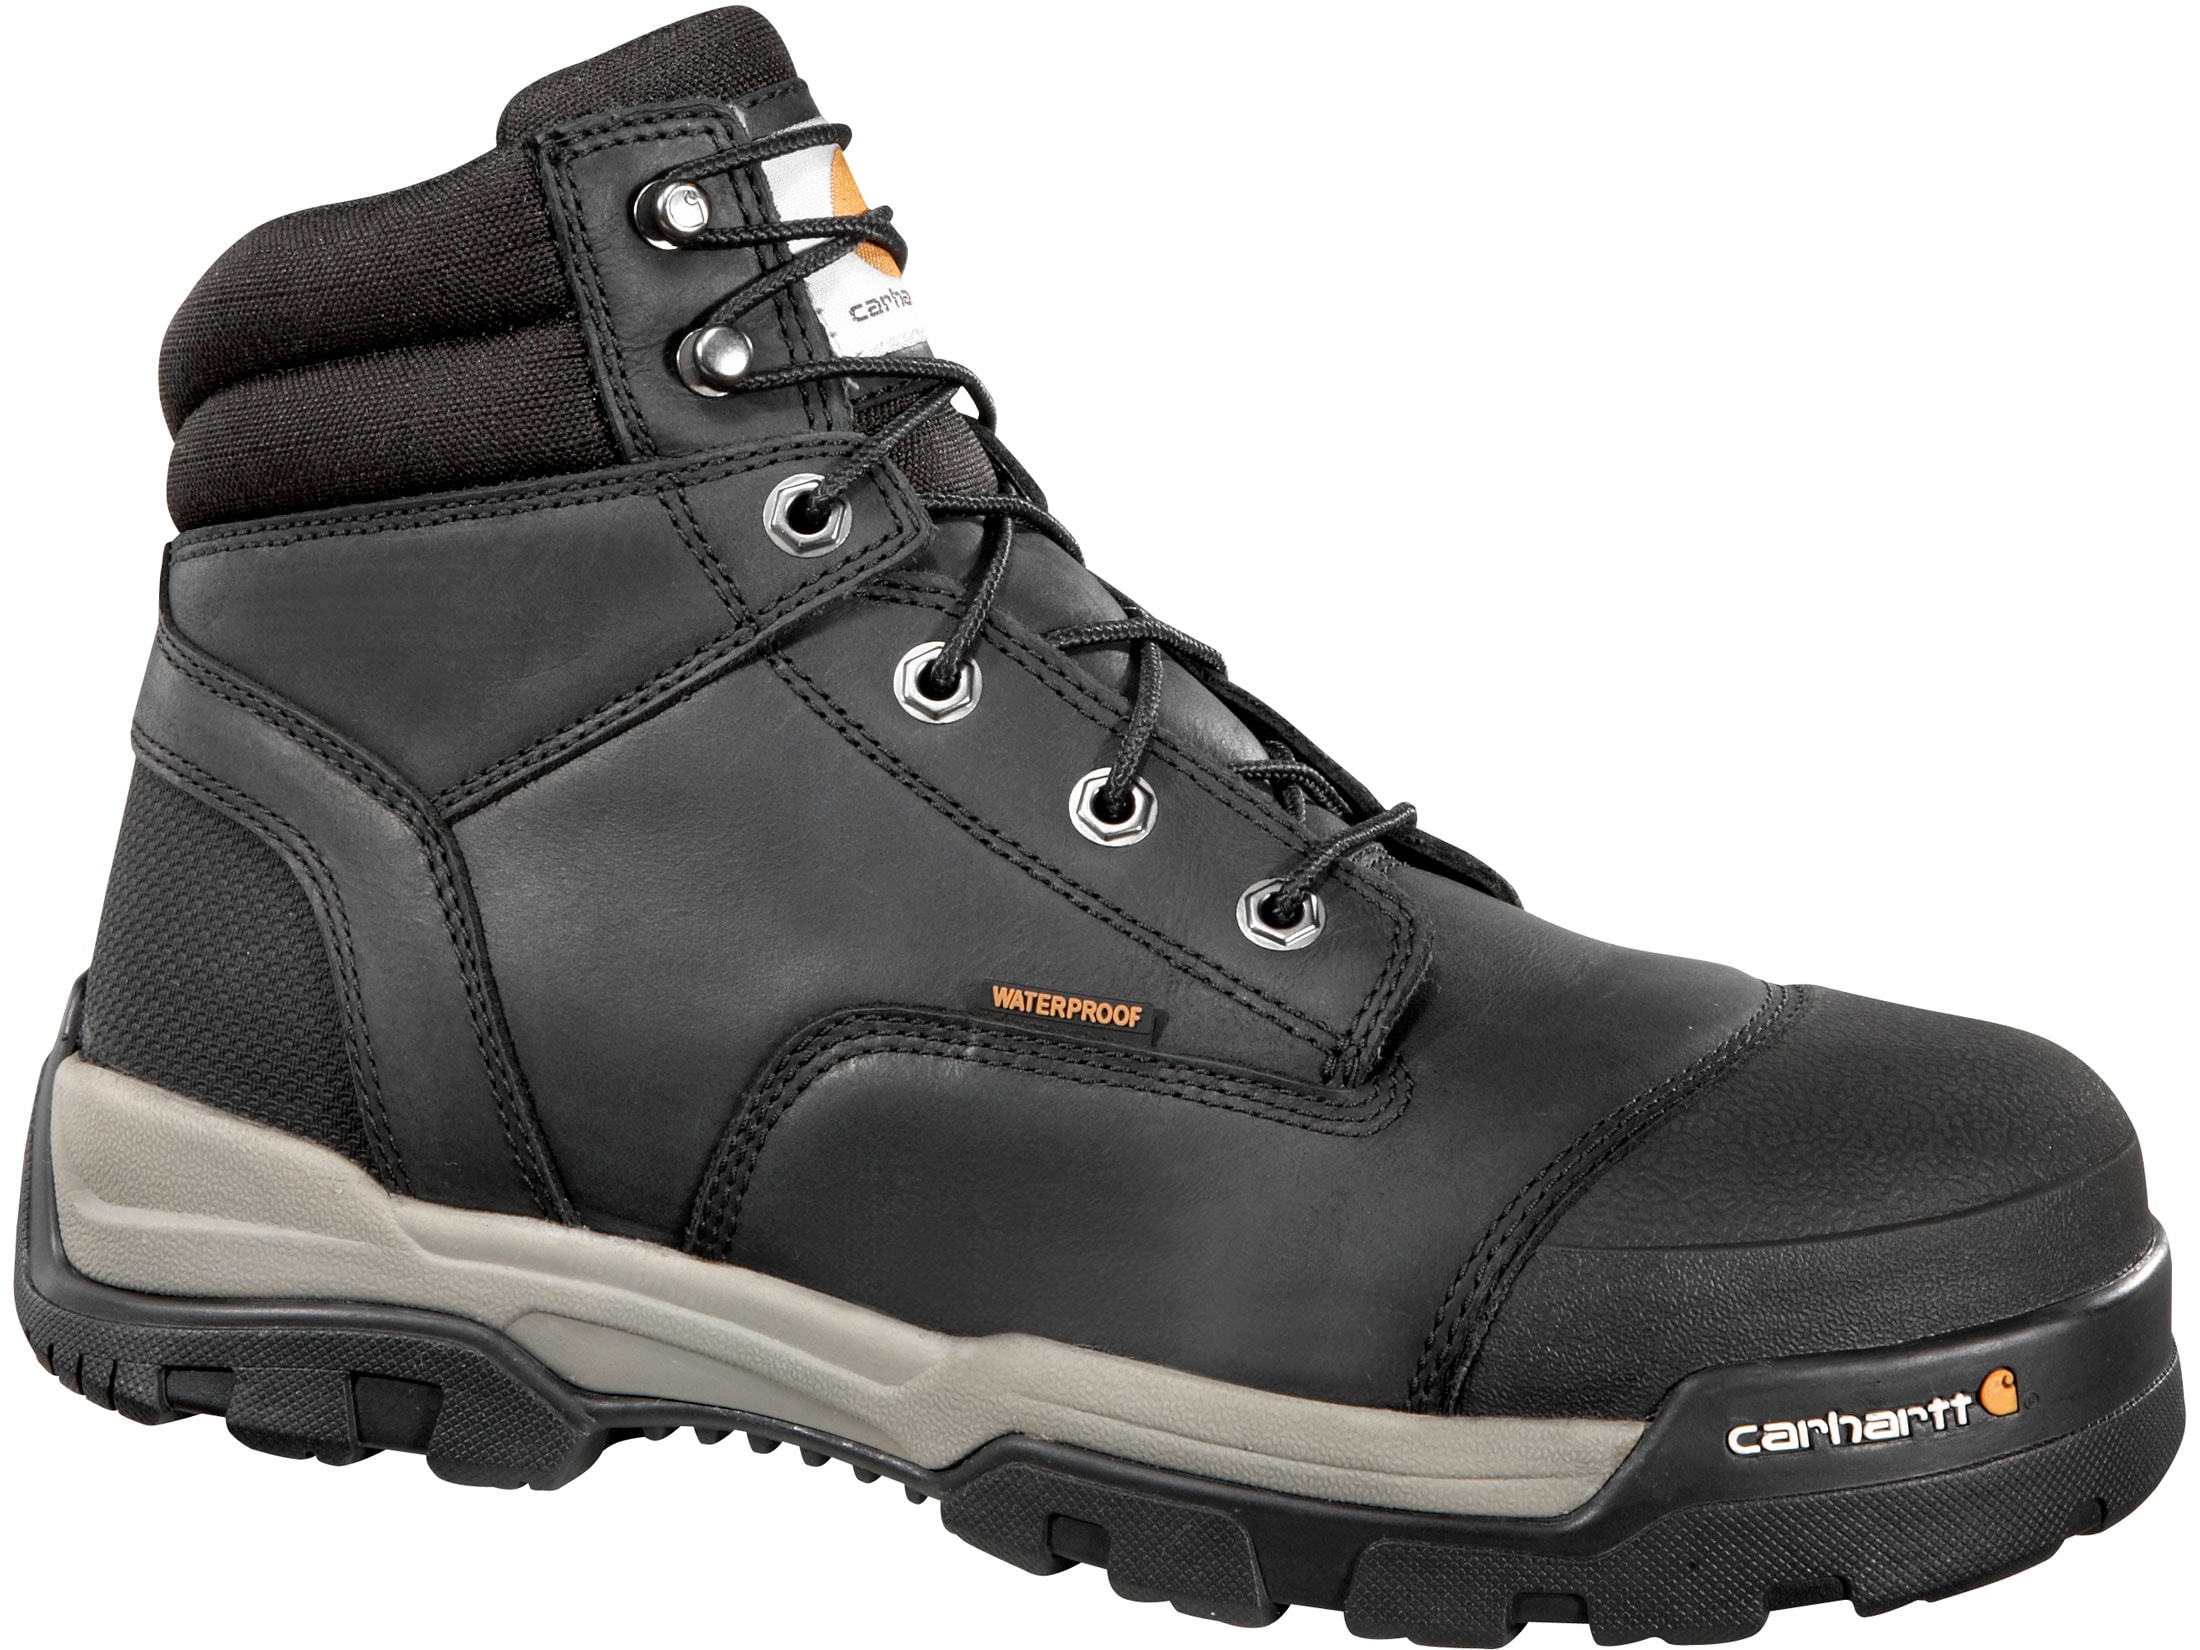 Carhartt Energy 6 Waterproof Composite Safety Toe Work Boots Leather